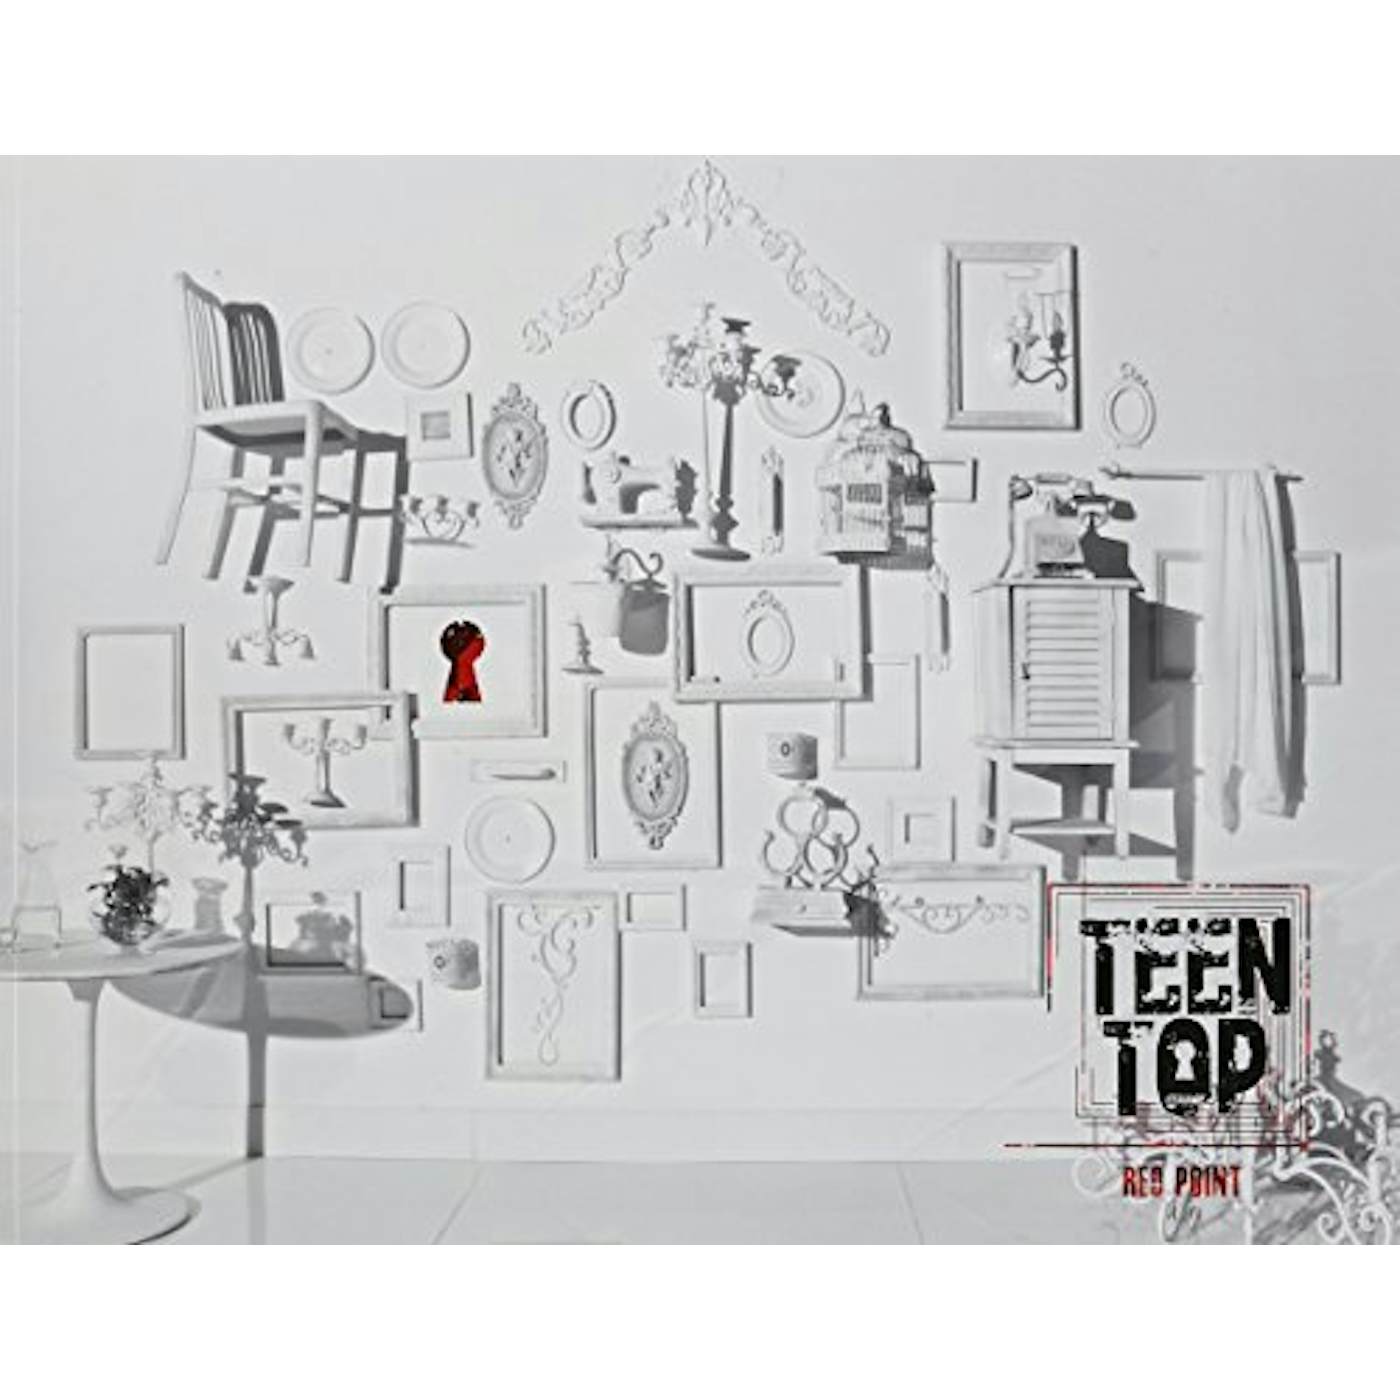 TEEN TOP RED POINT: CHIC VERSION CD